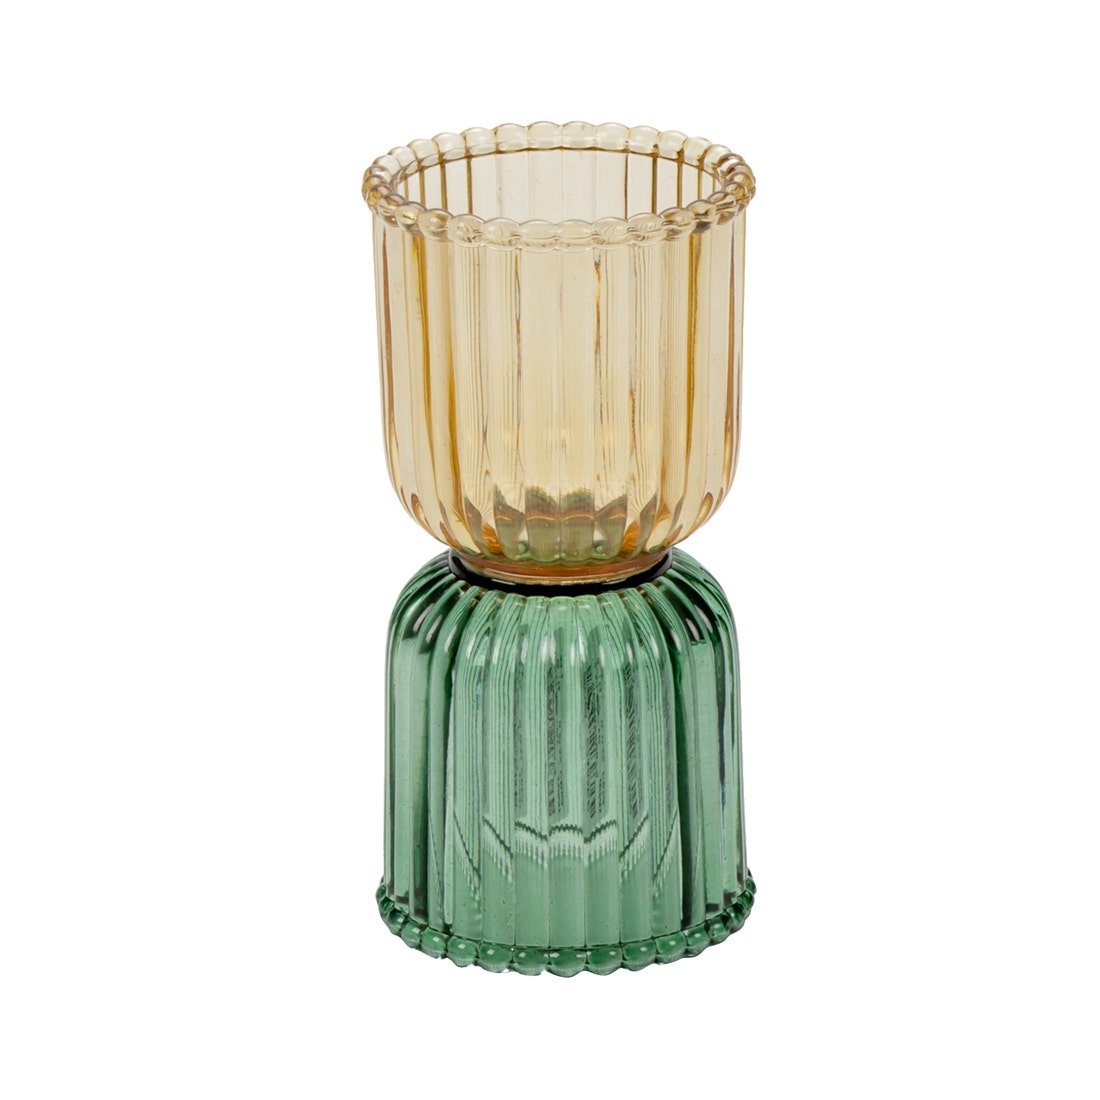 LS CANDLE HOLDER #GM26-224835C YELLOW GREEN CLEAR GLASS